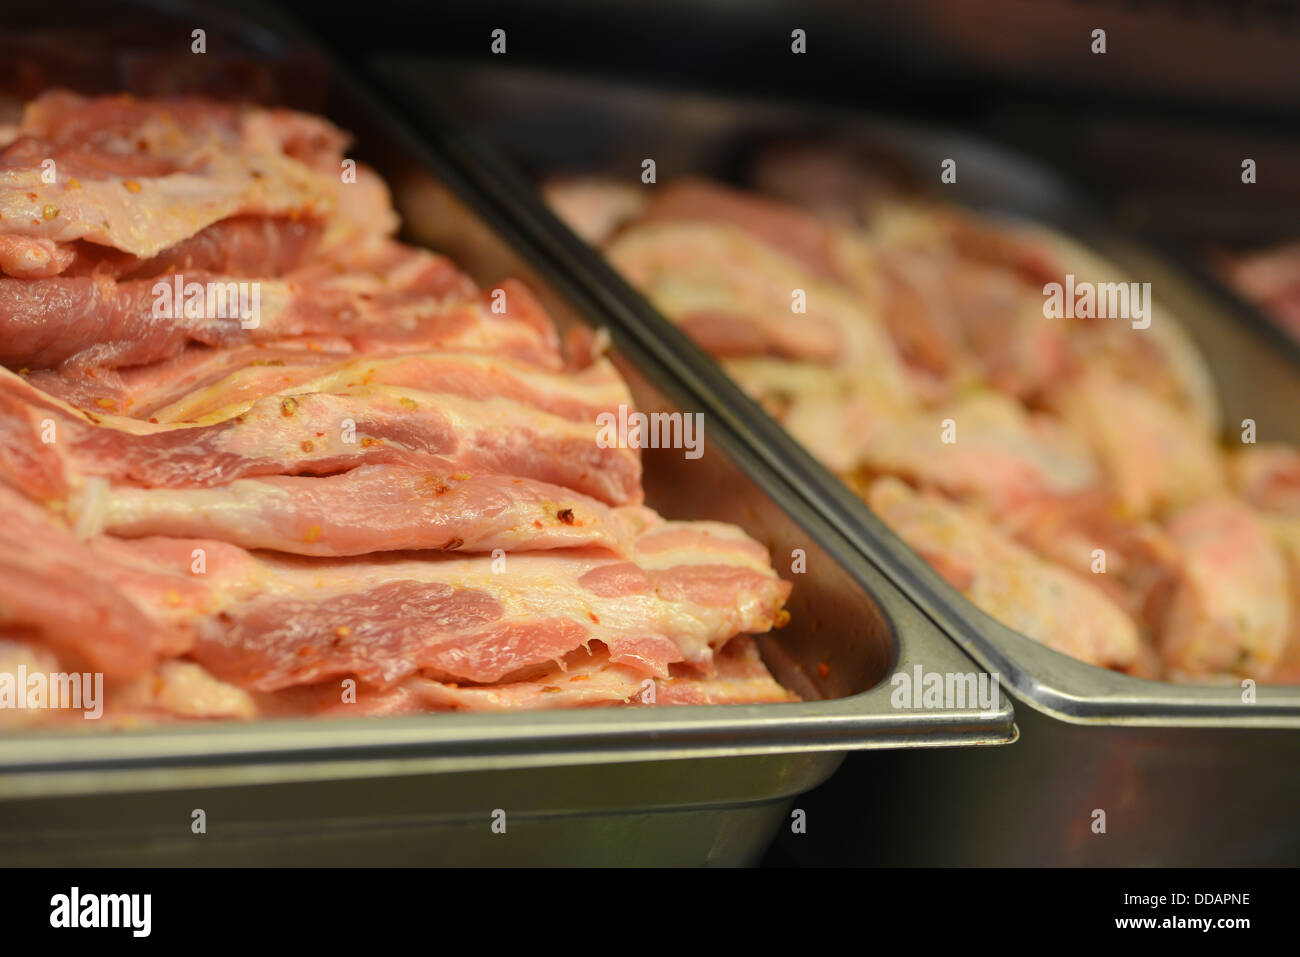 Animal meat products beef cow pork chicken pieces slice portions on diplay Stock Photo